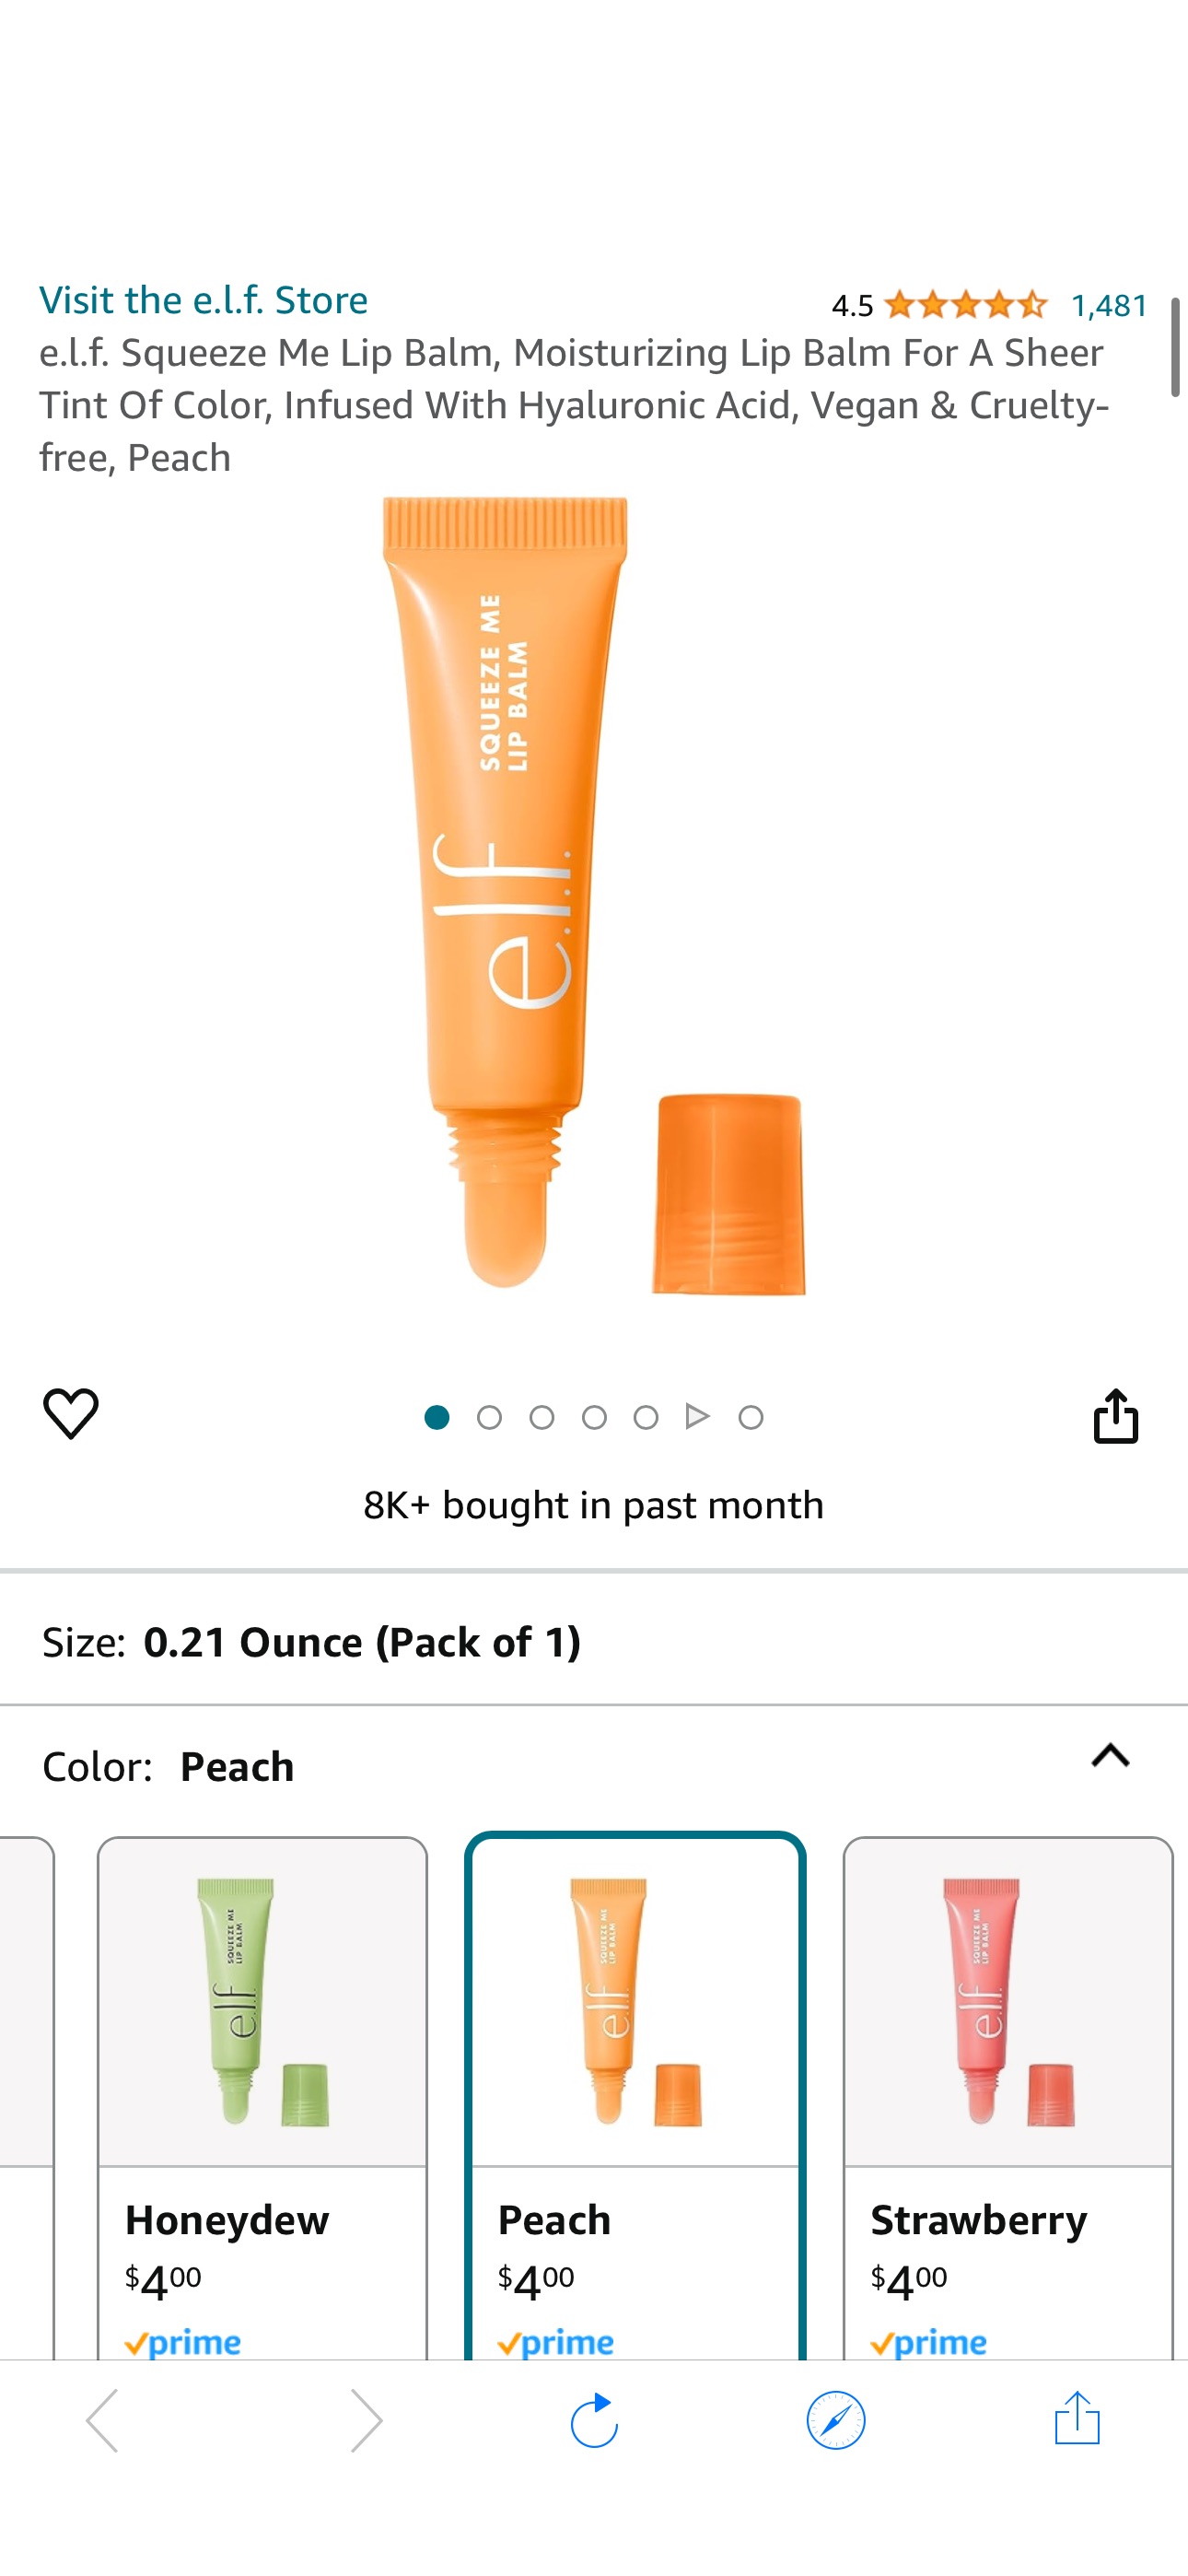 Amazon.com : e.l.f. Squeeze Me Lip Balm, Moisturizing Lip Balm For A Sheer Tint Of Color, Infused With Hyaluronic Acid, Vegan & Cruelty-free, Peach : Beauty & Personal Care